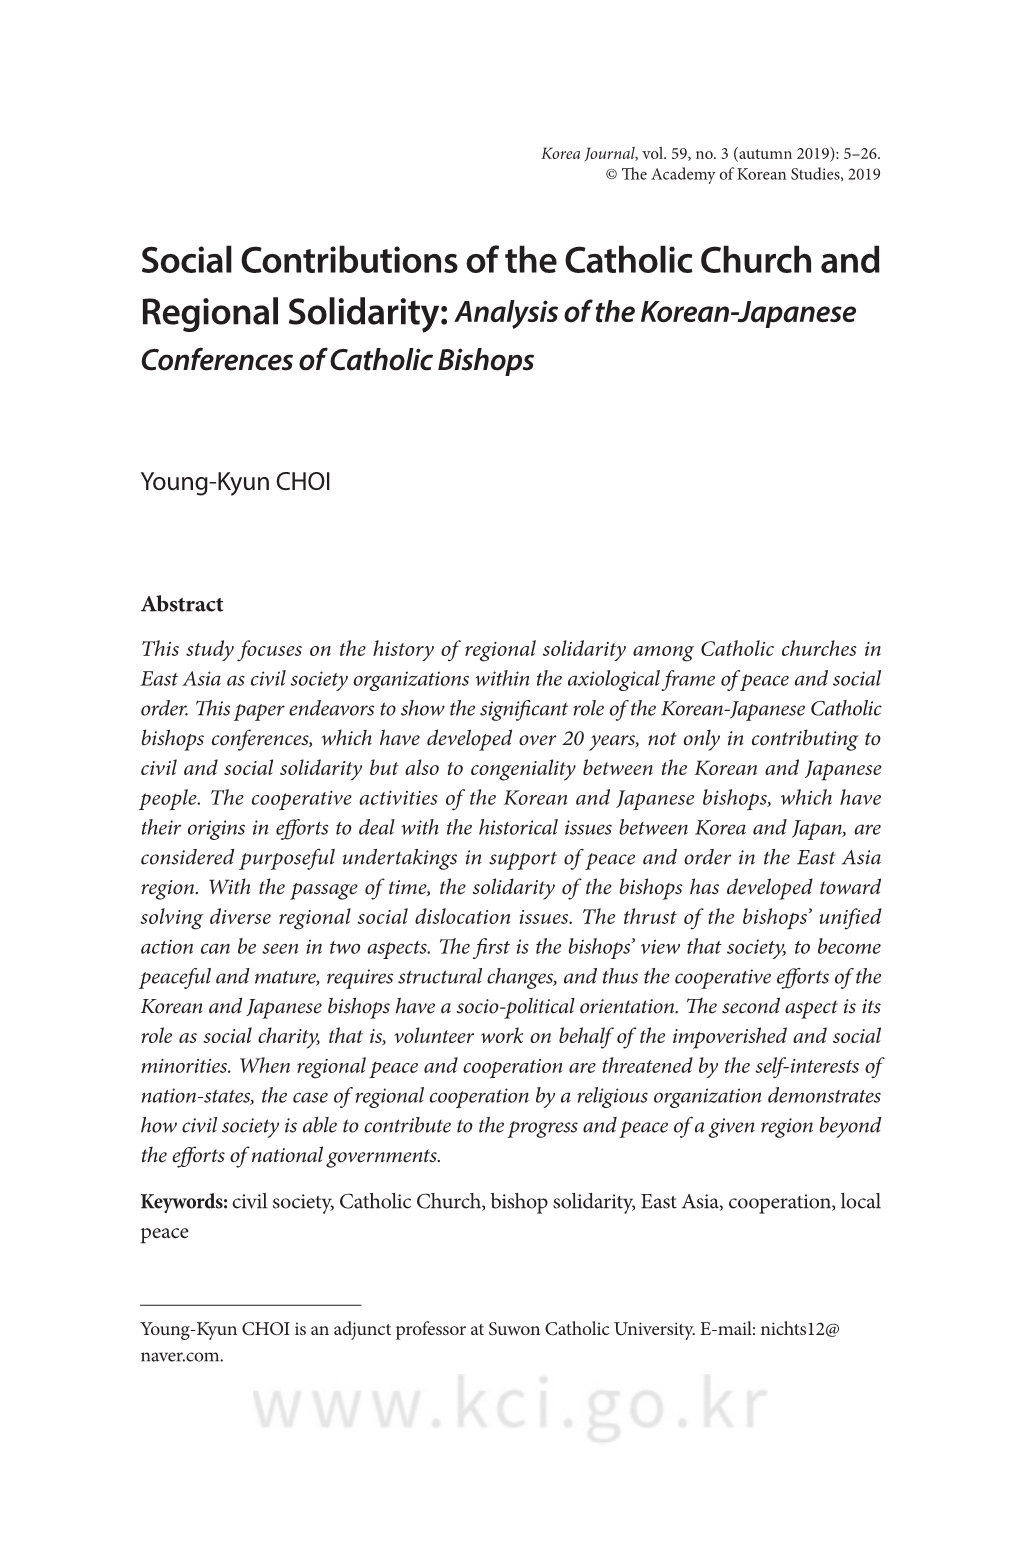 Social Contributions of the Catholic Church and Regional Solidarity: Analysis of the Korean-Japanese Conferences of Catholic Bishops